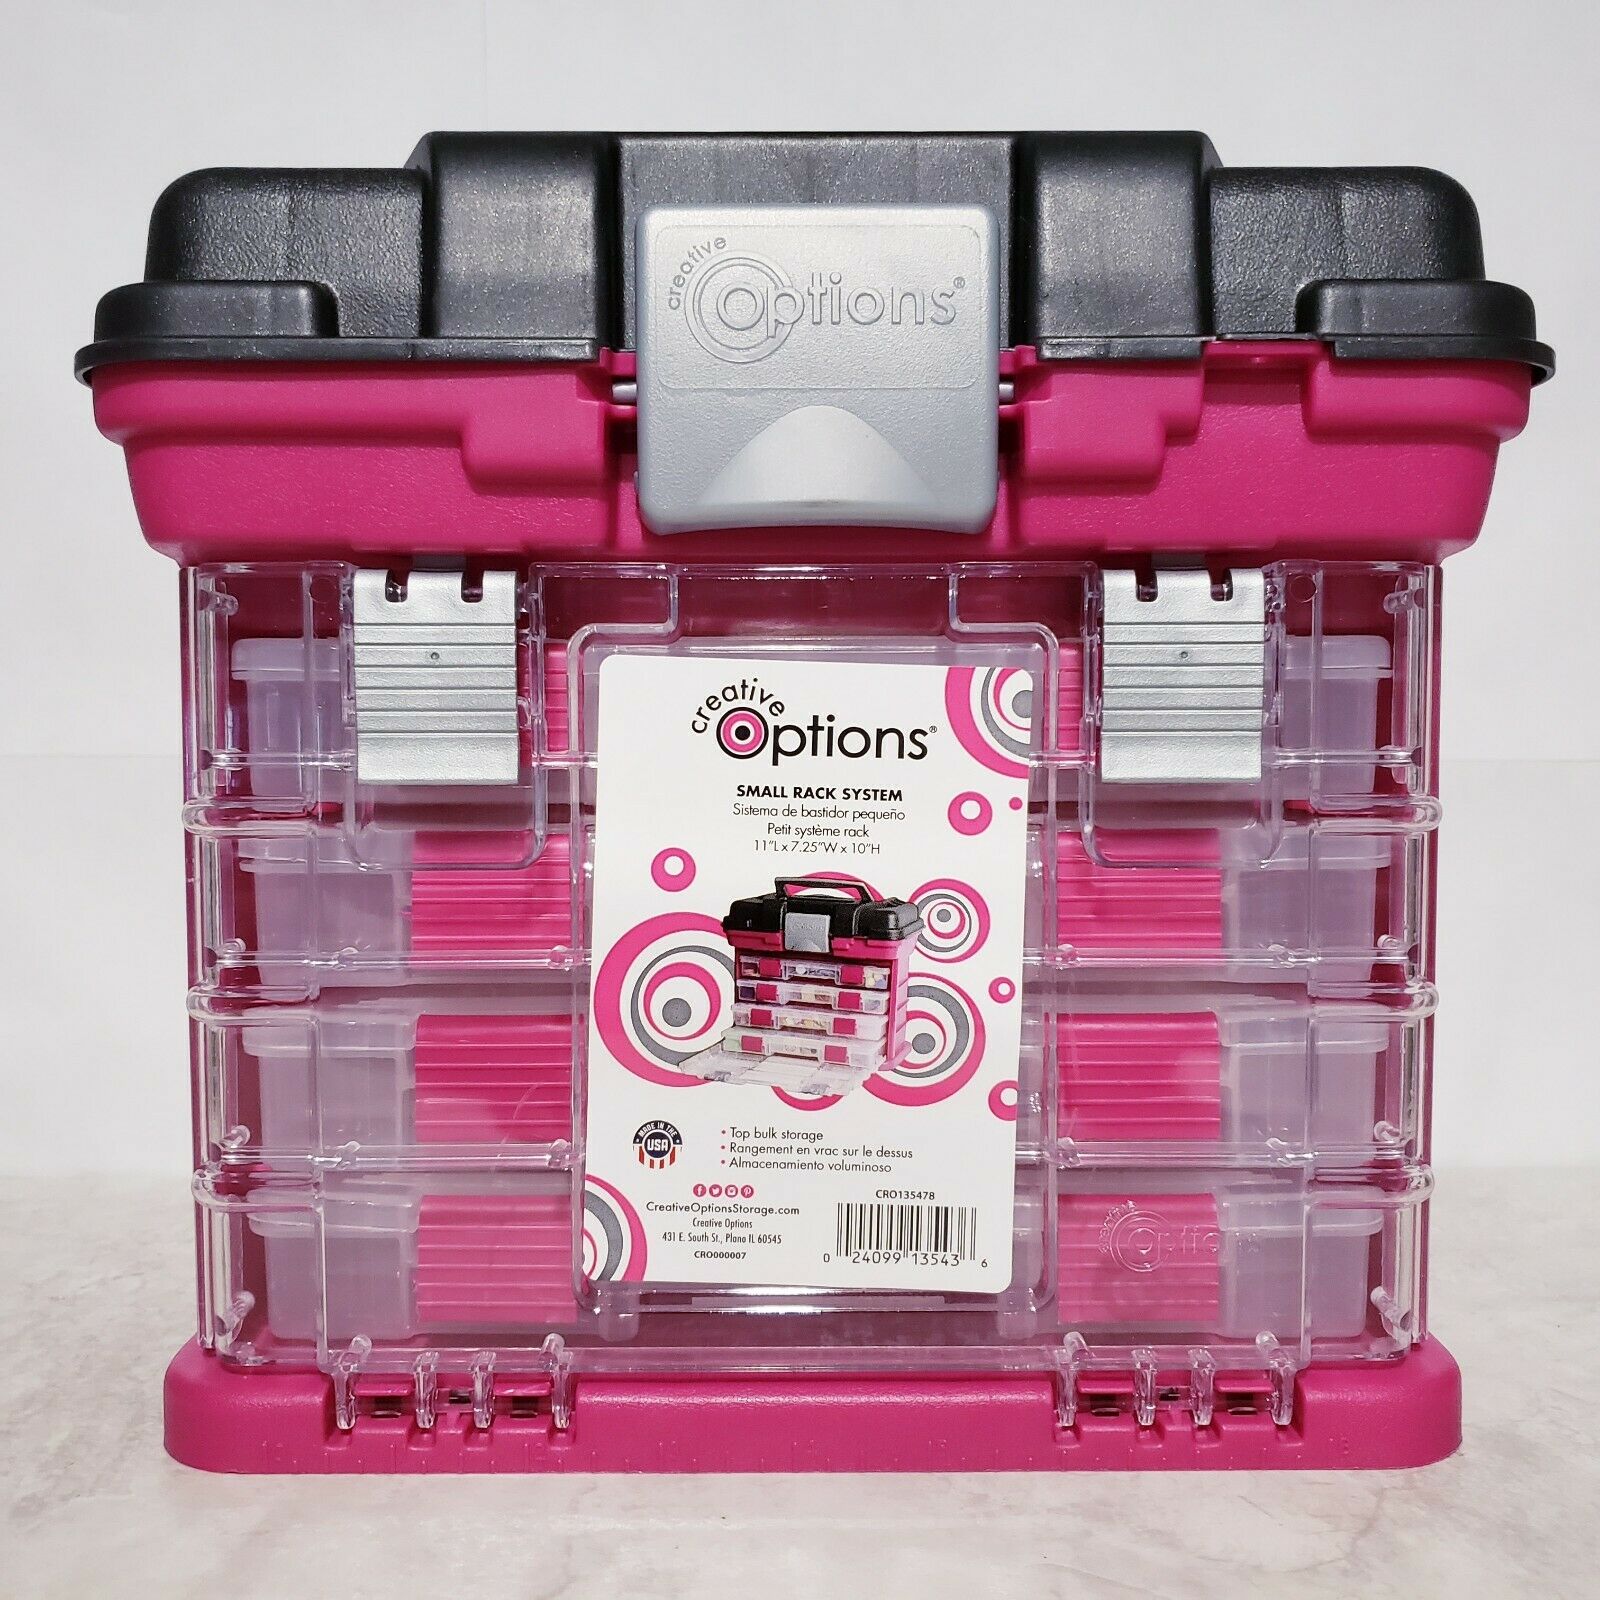 Creative Options Grab'n'go Rack System Organization With Utility Boxes